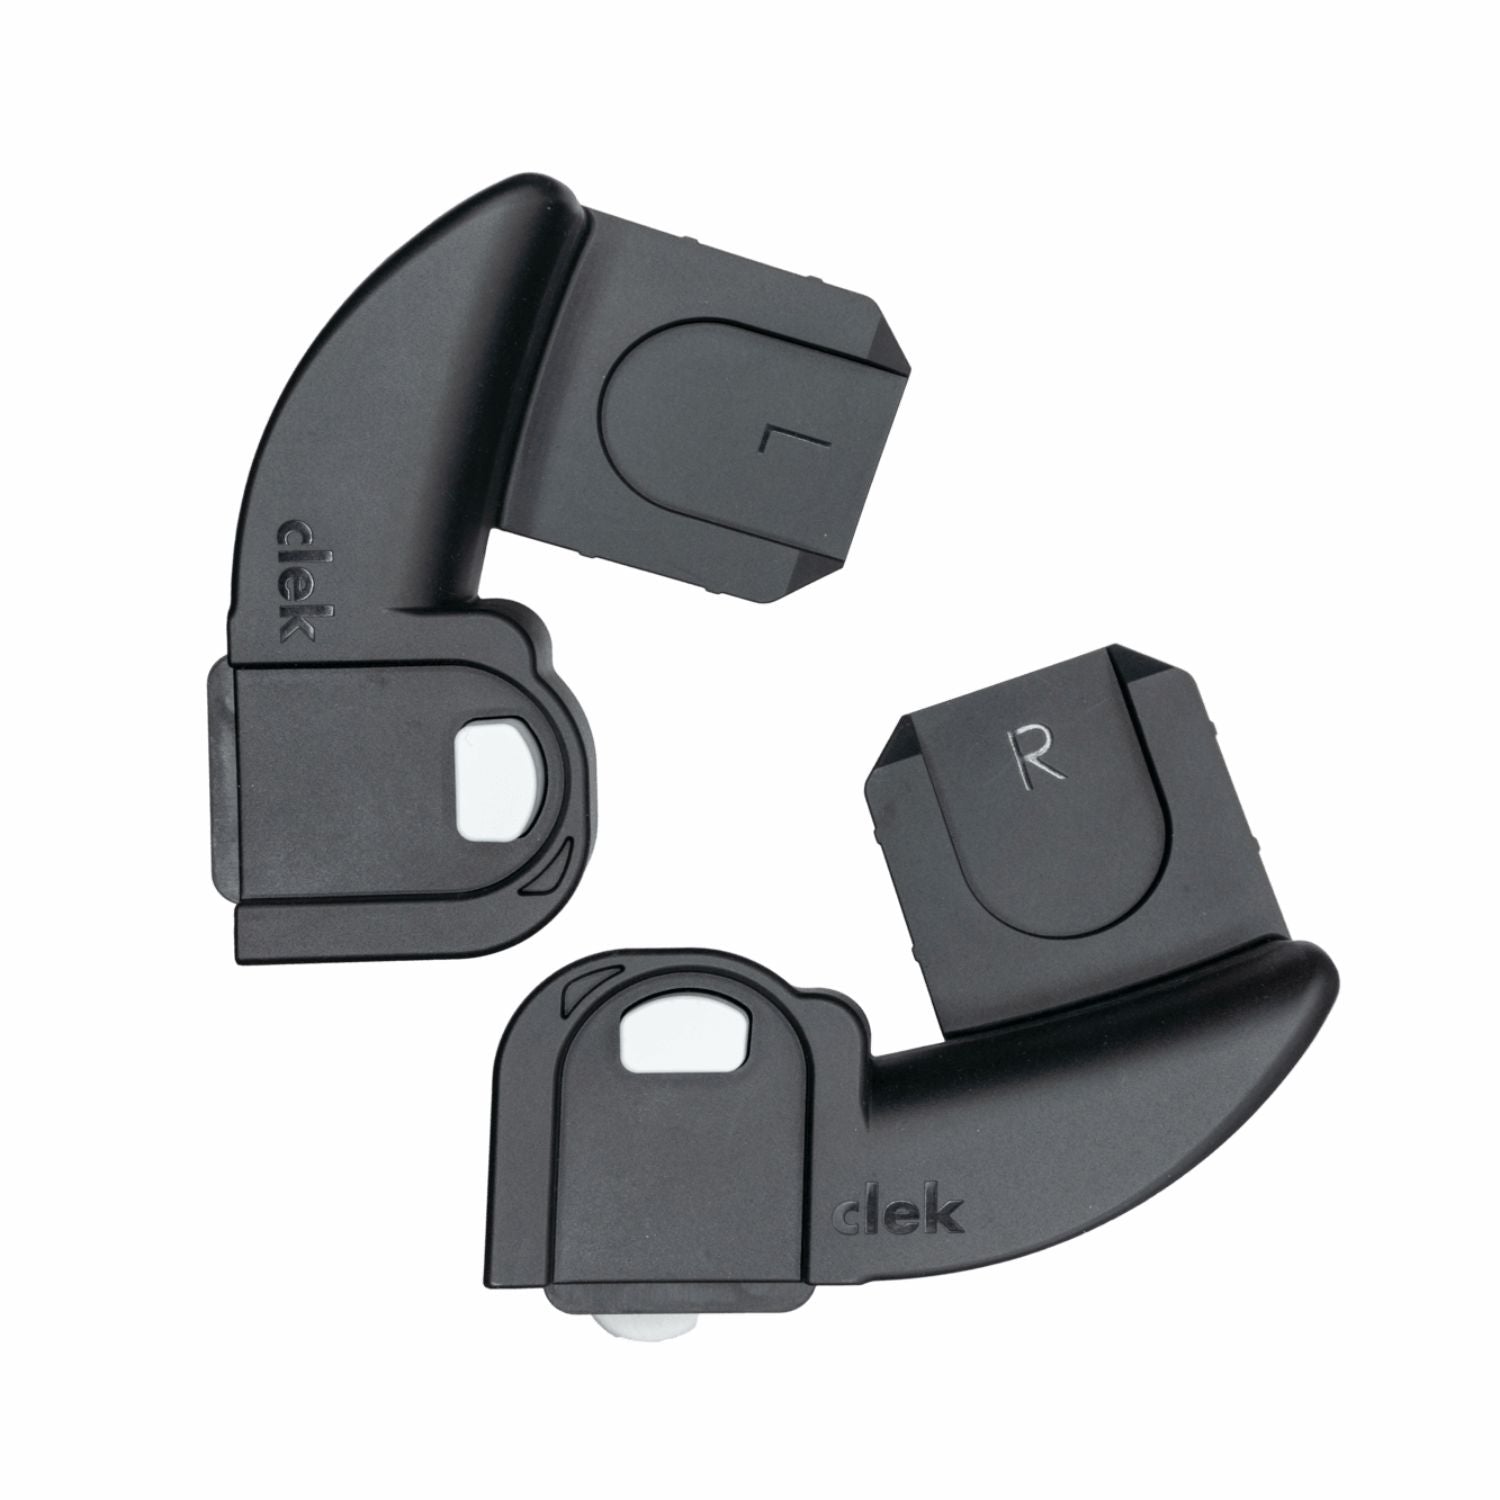 Clek Liing and Liingo Car Seat Adapters for UPPAbaby